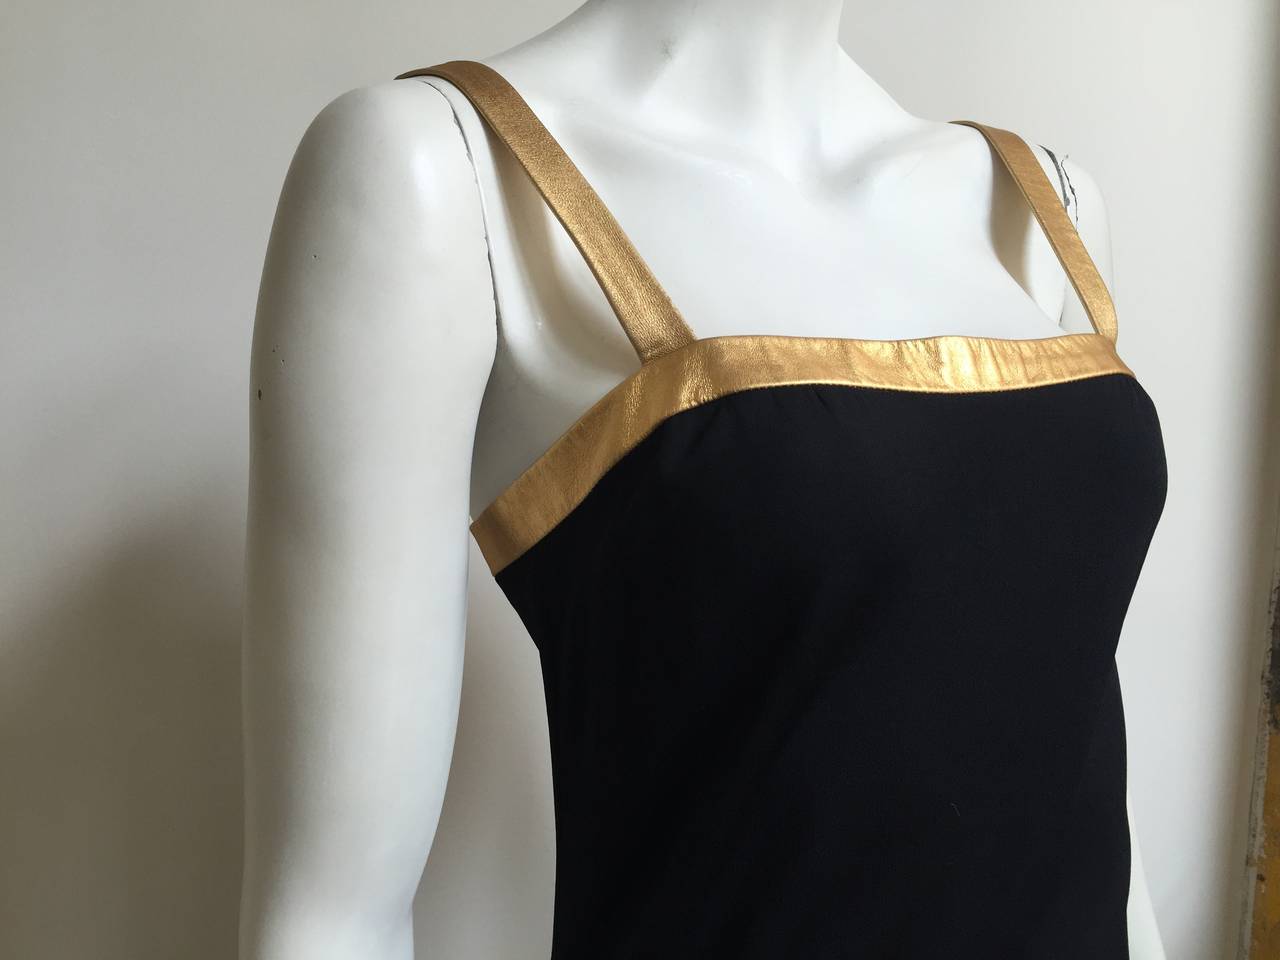 Ralph Lauren Collection Purple Label long black jersey with gold leather straps and trim will fit a size 6.  Please see & use measurements below so you can properly measure your body. This stunning RL gown with gold leather trim & straps is